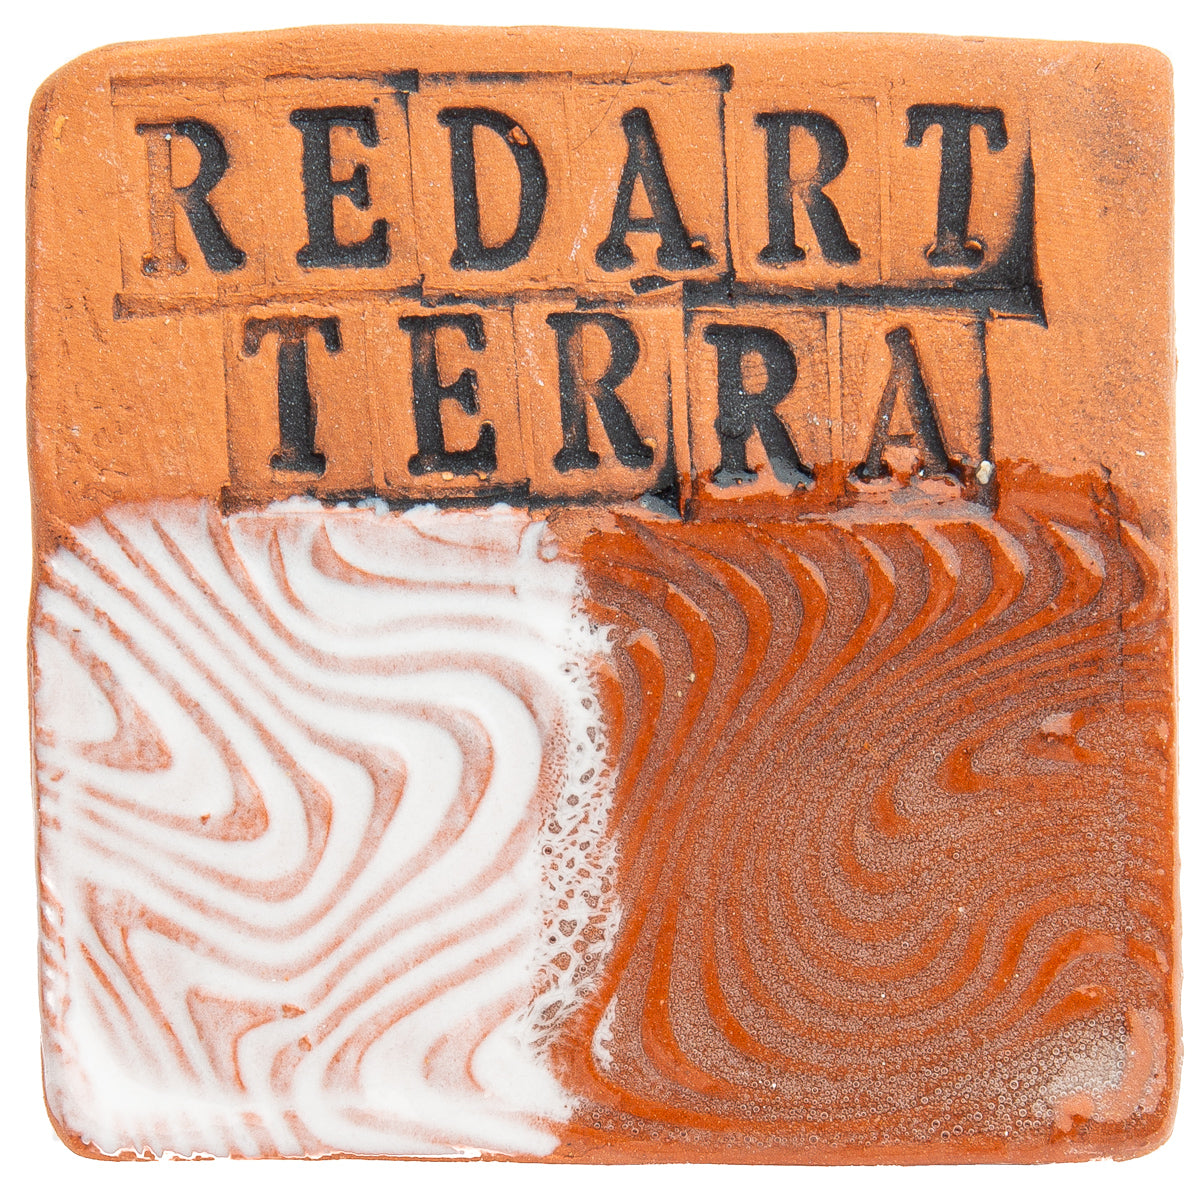 Lowfire Red Clay 25 lb. block